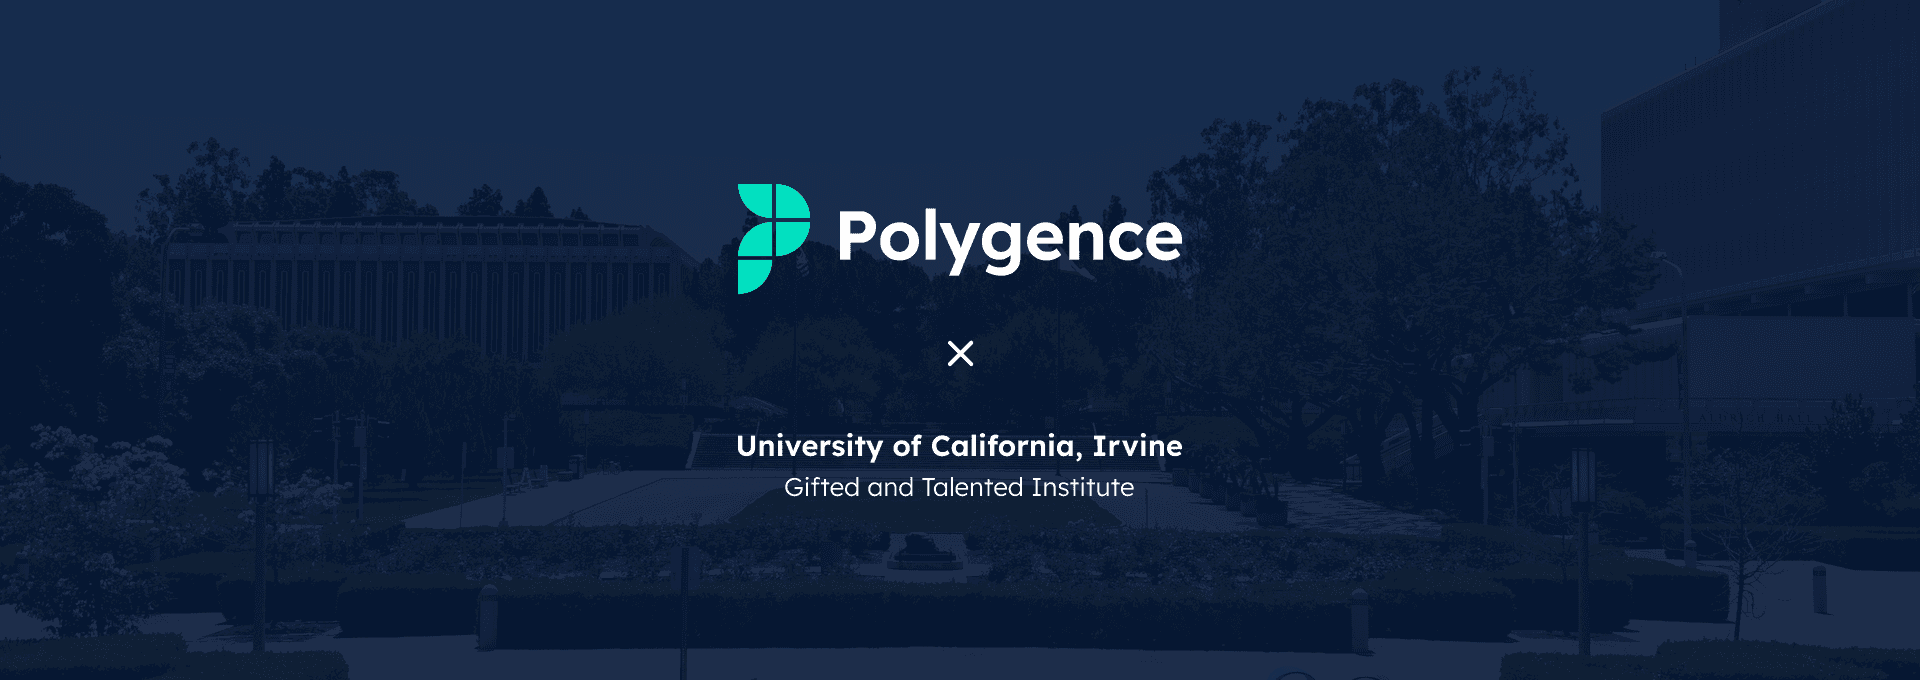 UCI campus with Polygence and UCI logos